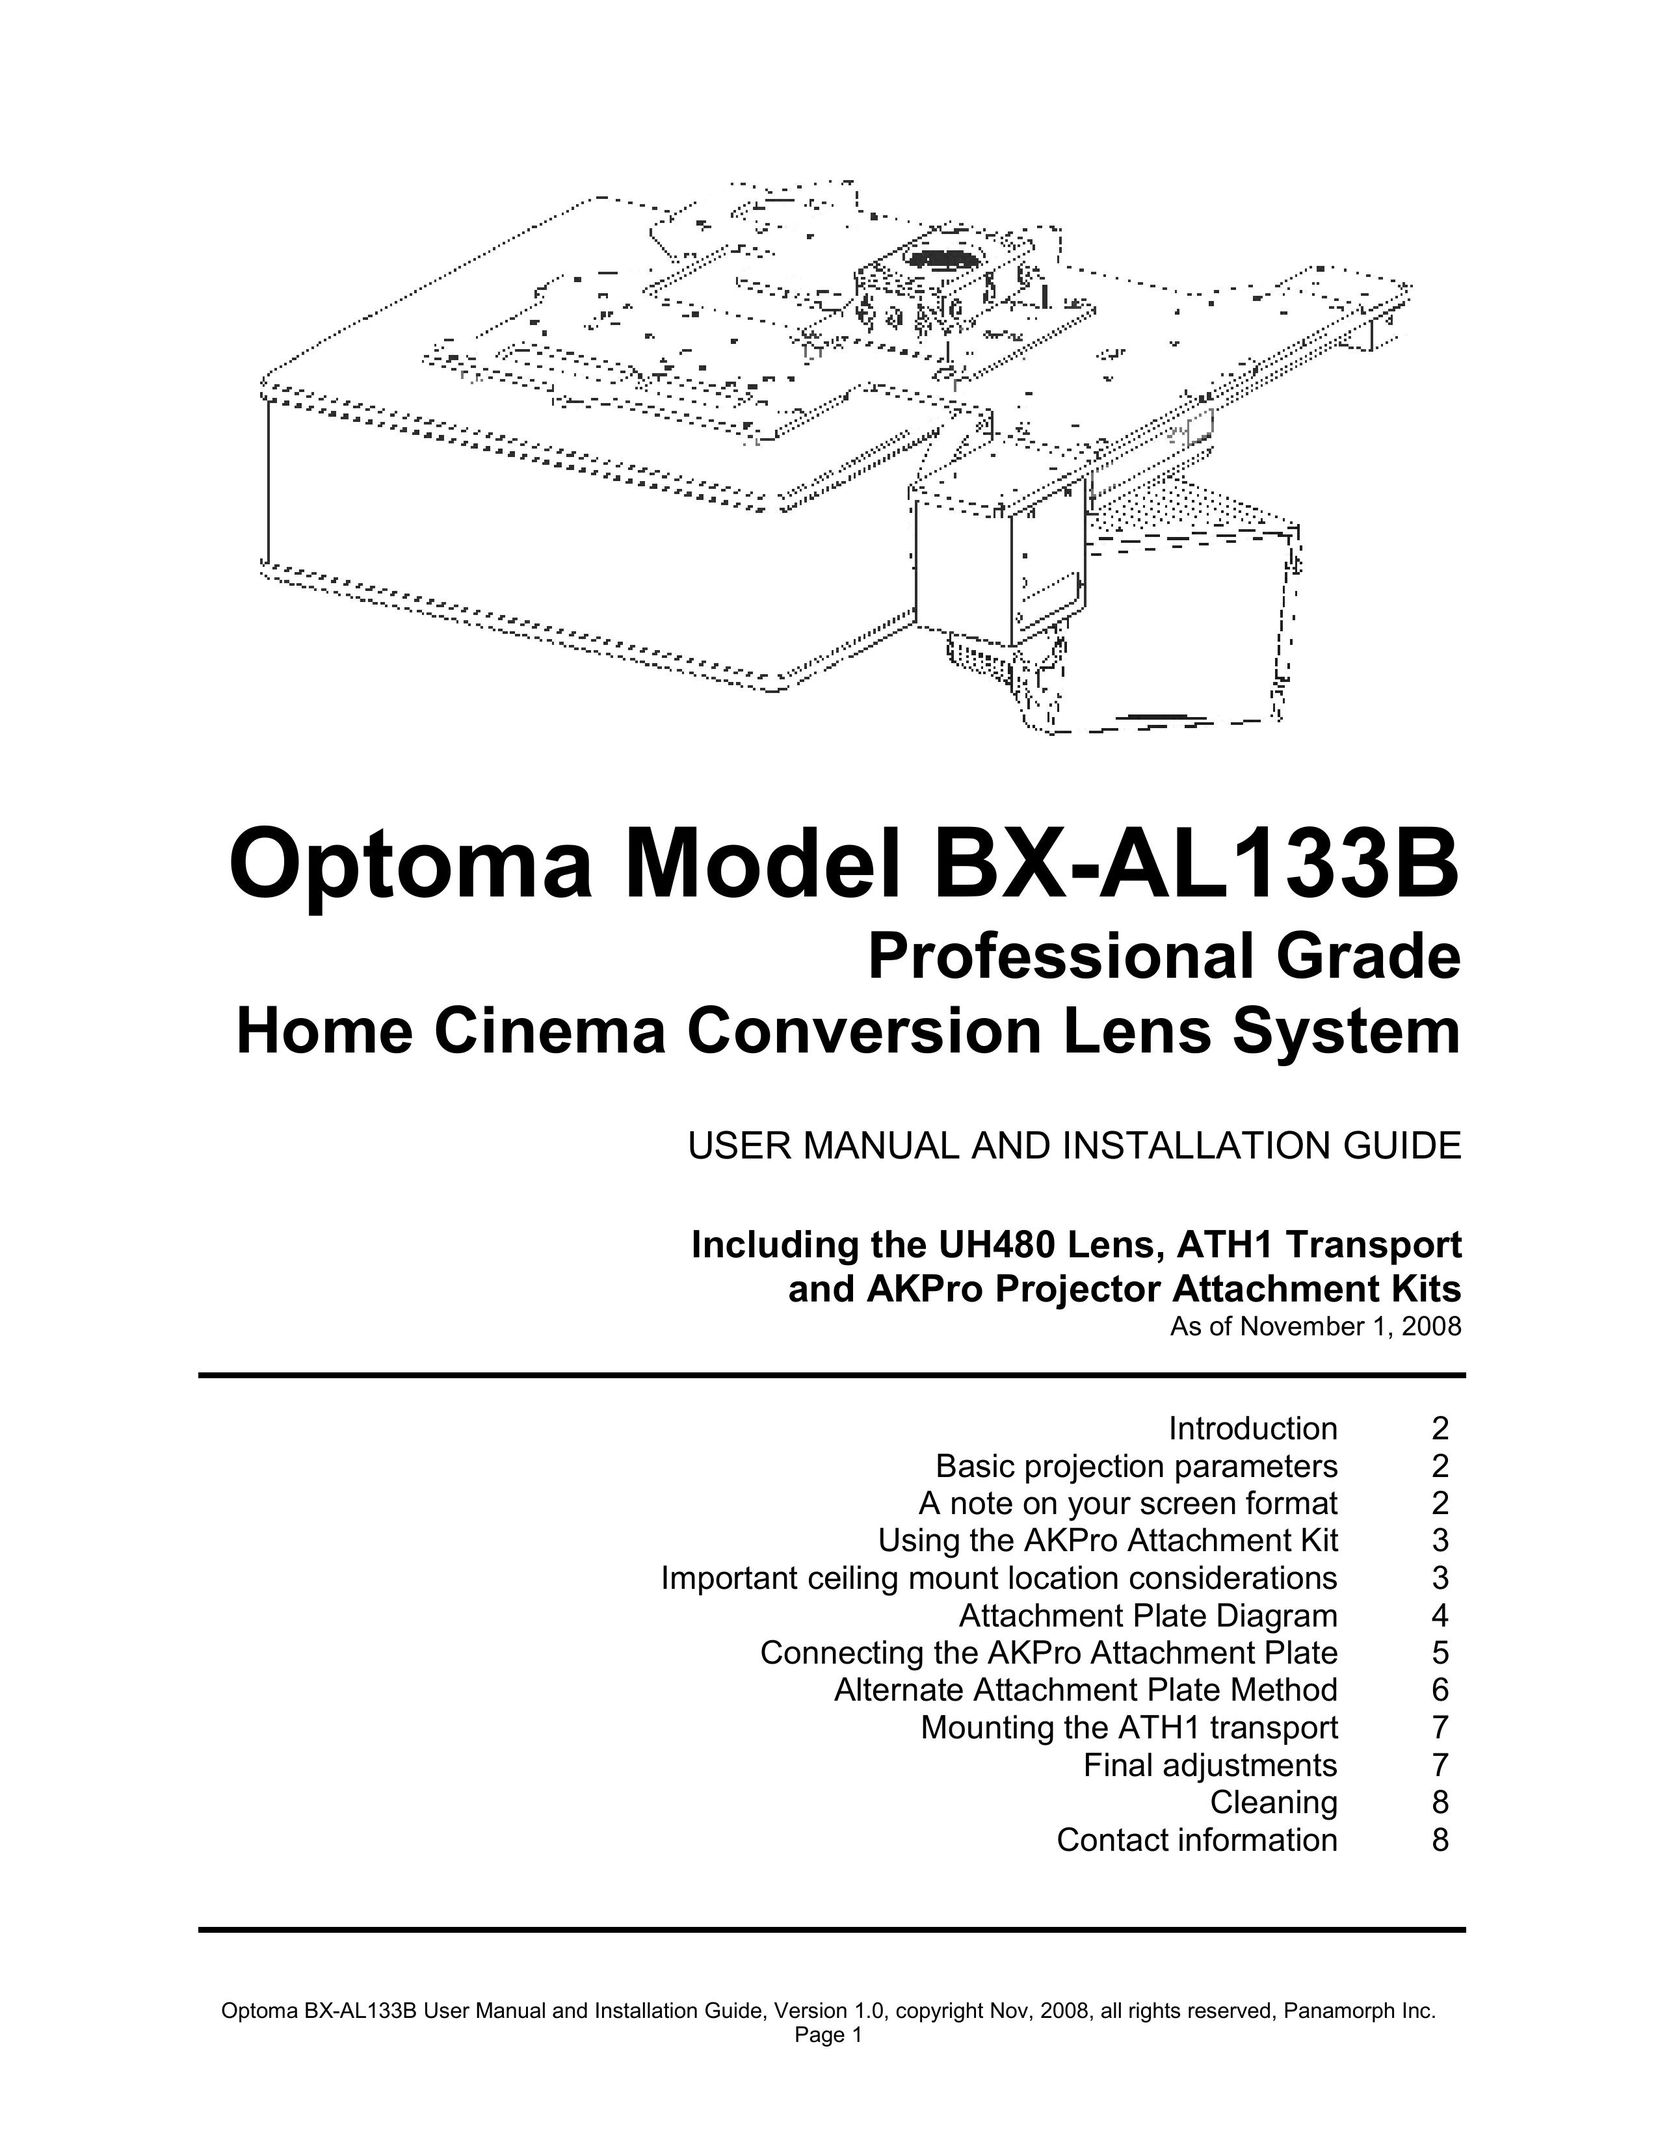 Optoma Technology AKPro Projector Accessories User Manual